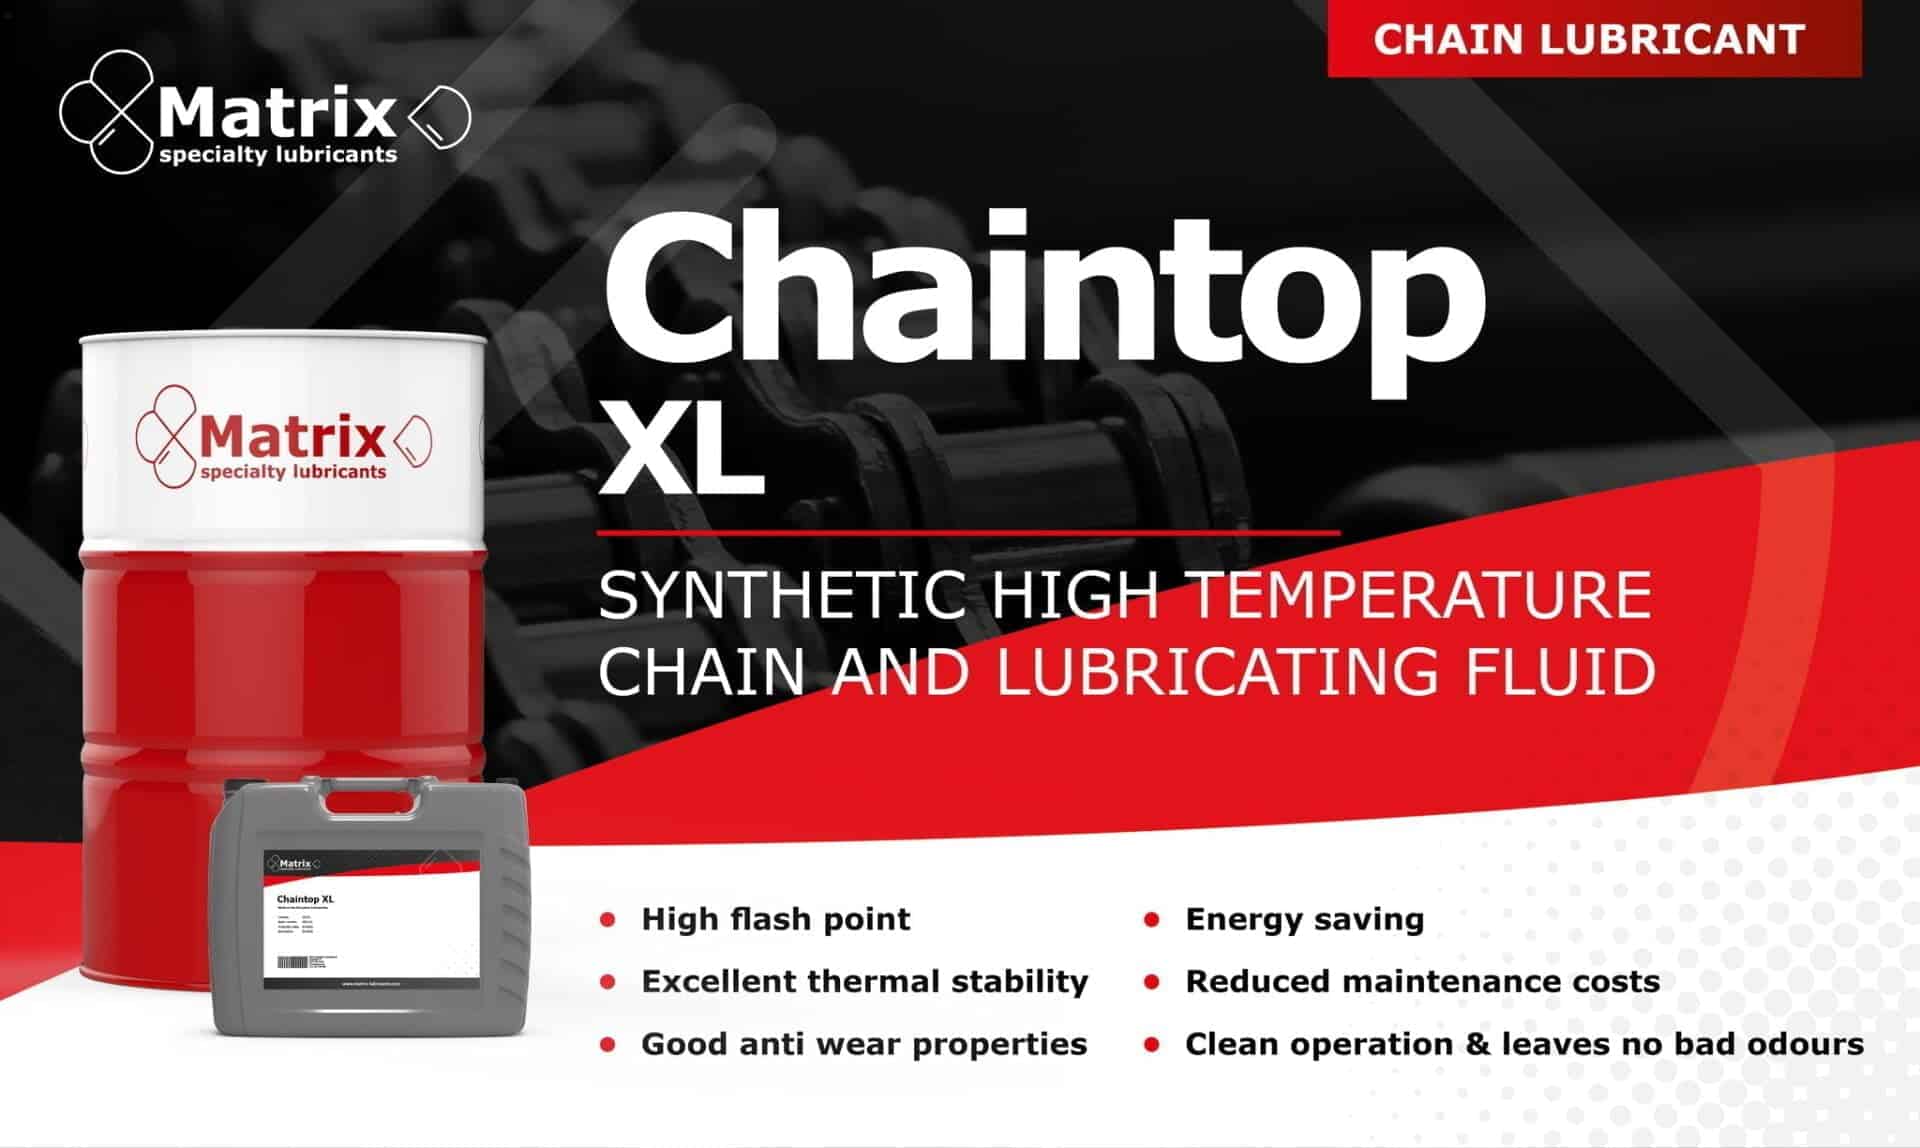 Promotional graphic for Chaintop XL, a synthetic high temperature chain and lubricating fluid from Matrix Specialty Lubricants.